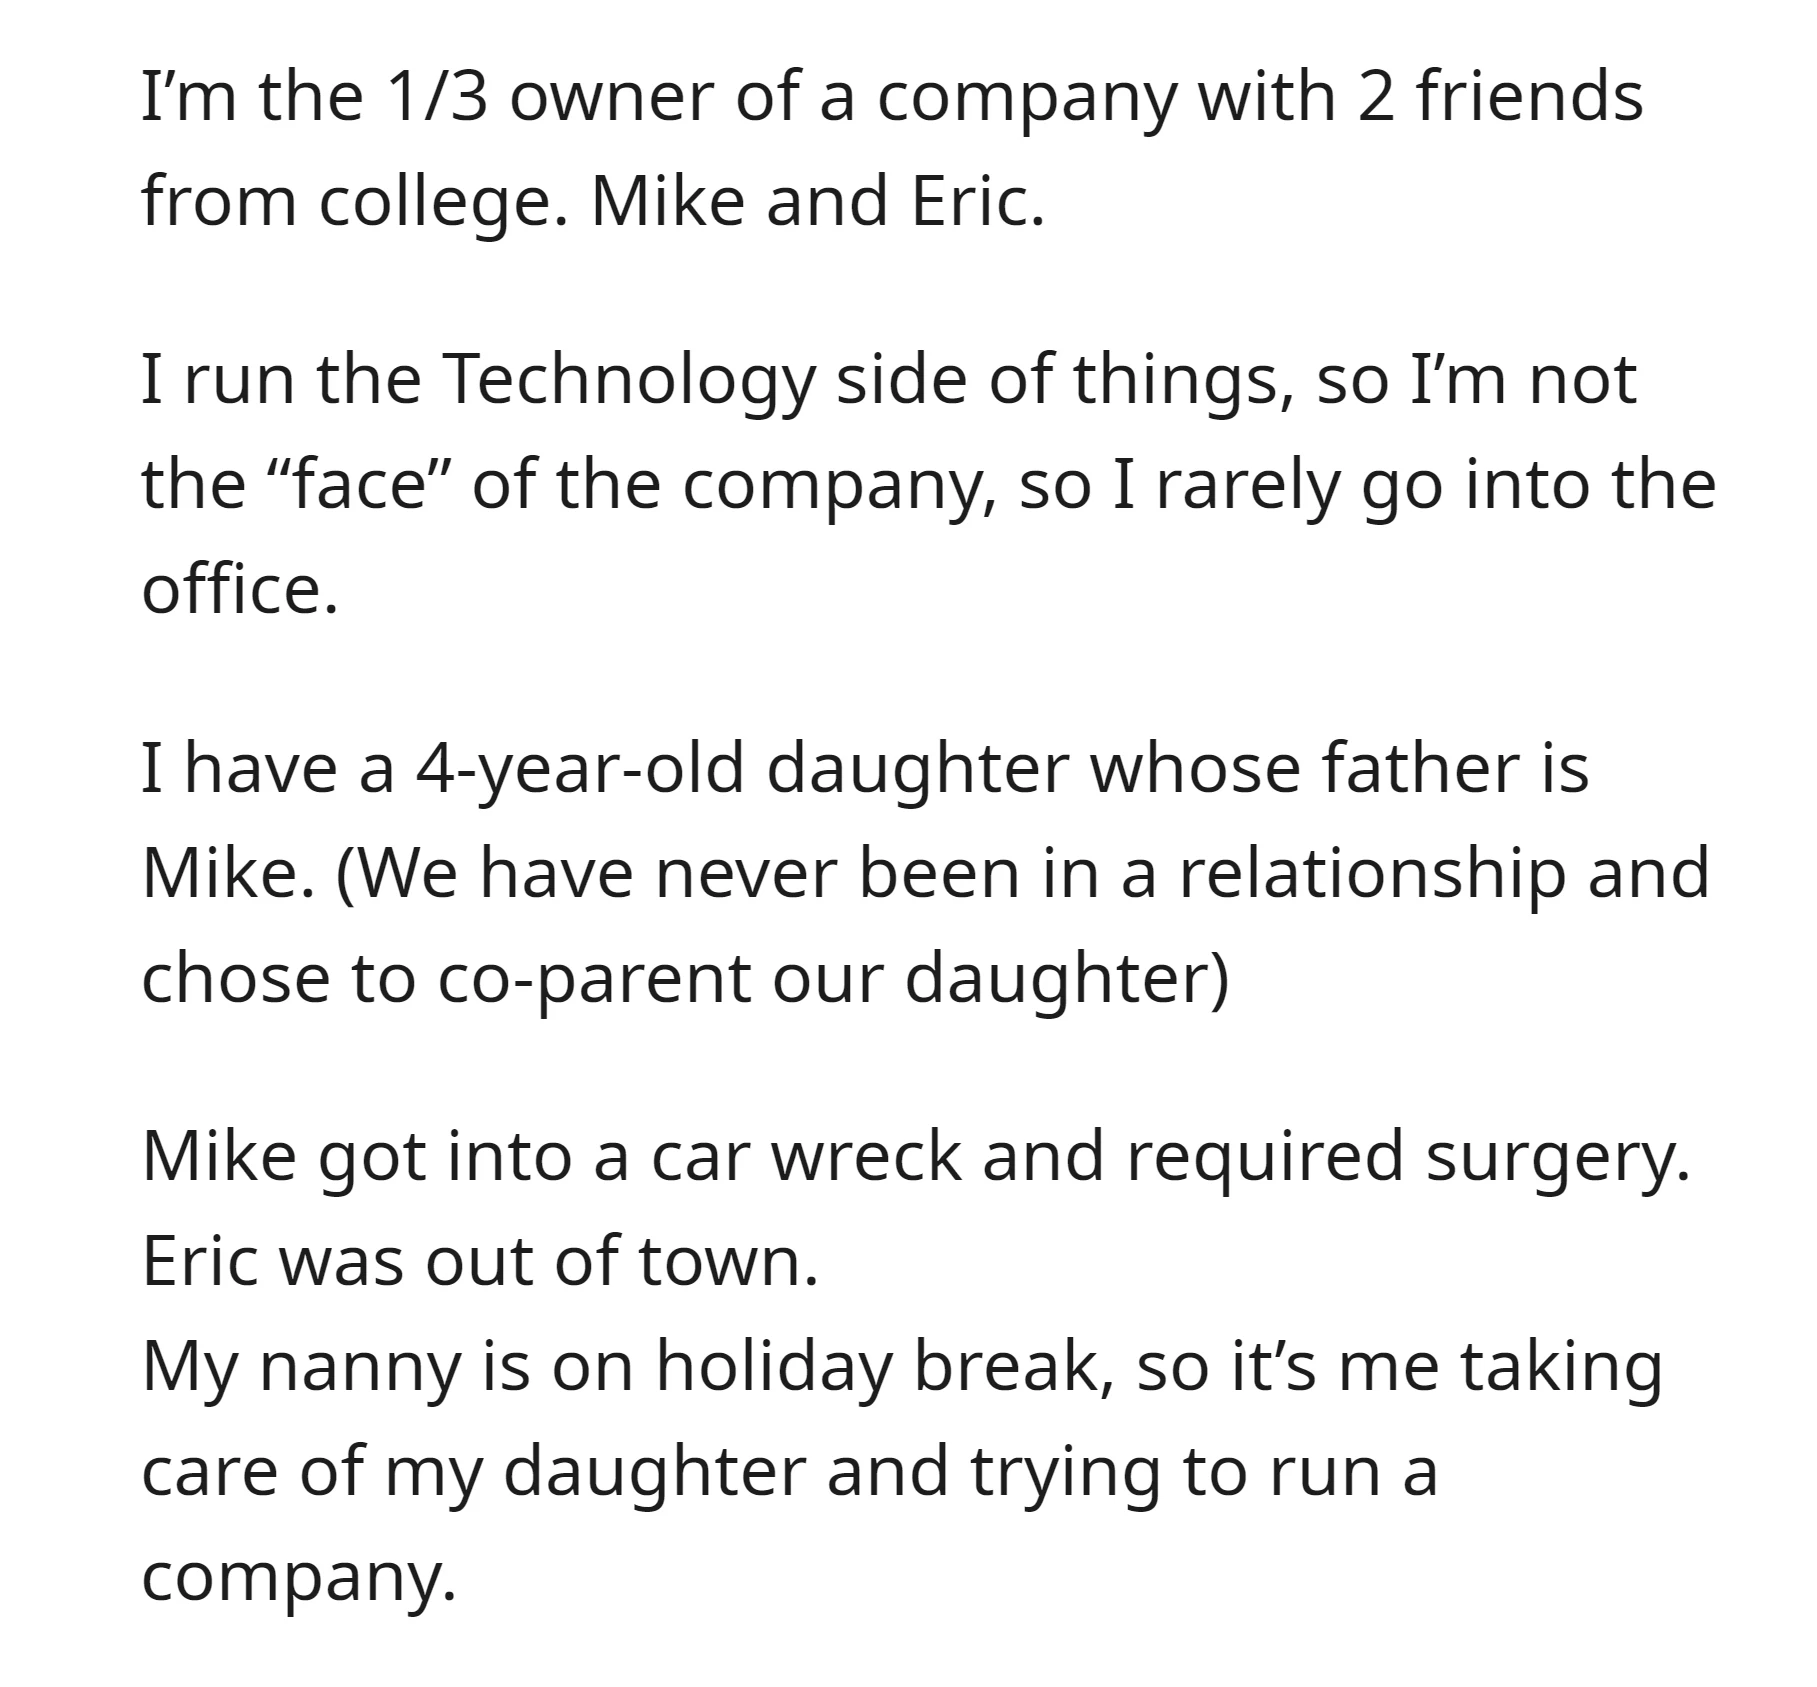 OP is juggling running the Technology side remotely while caring for their 4-year-old daughter